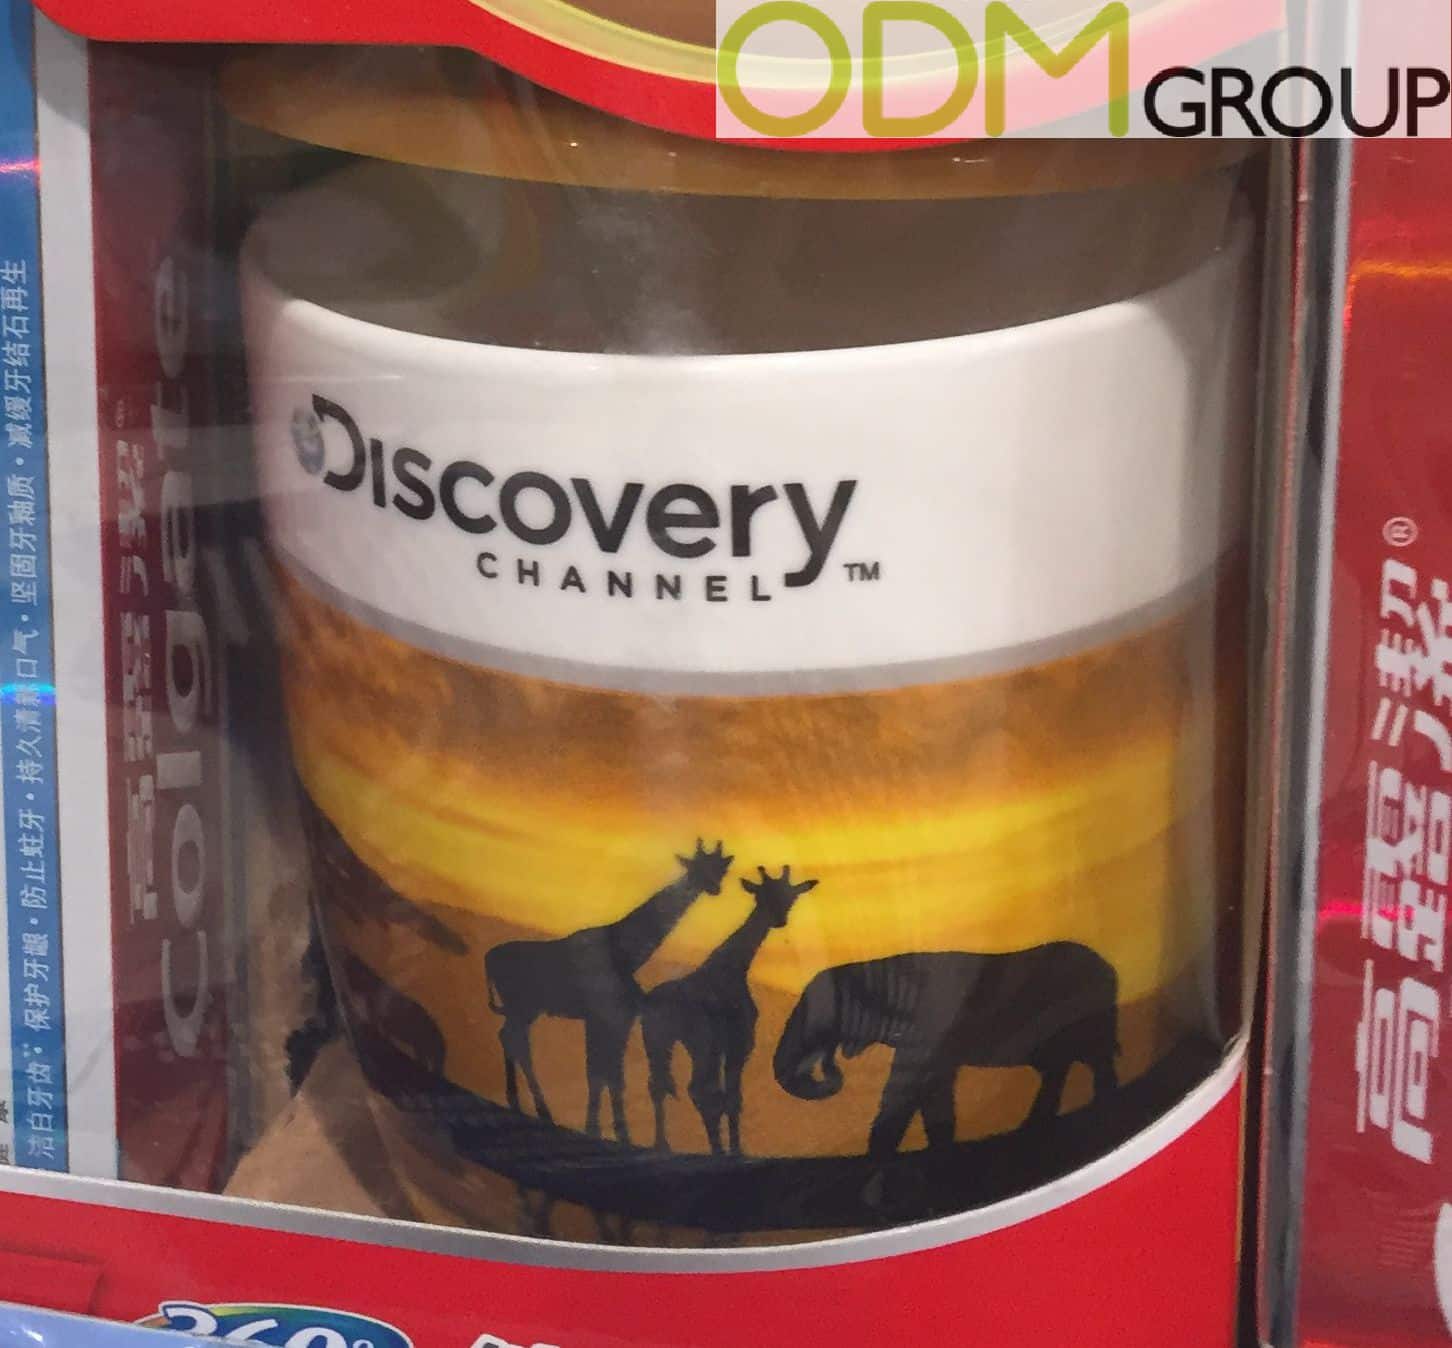 Free Gift Mug - Promotion by Colgate and Discovery Channel